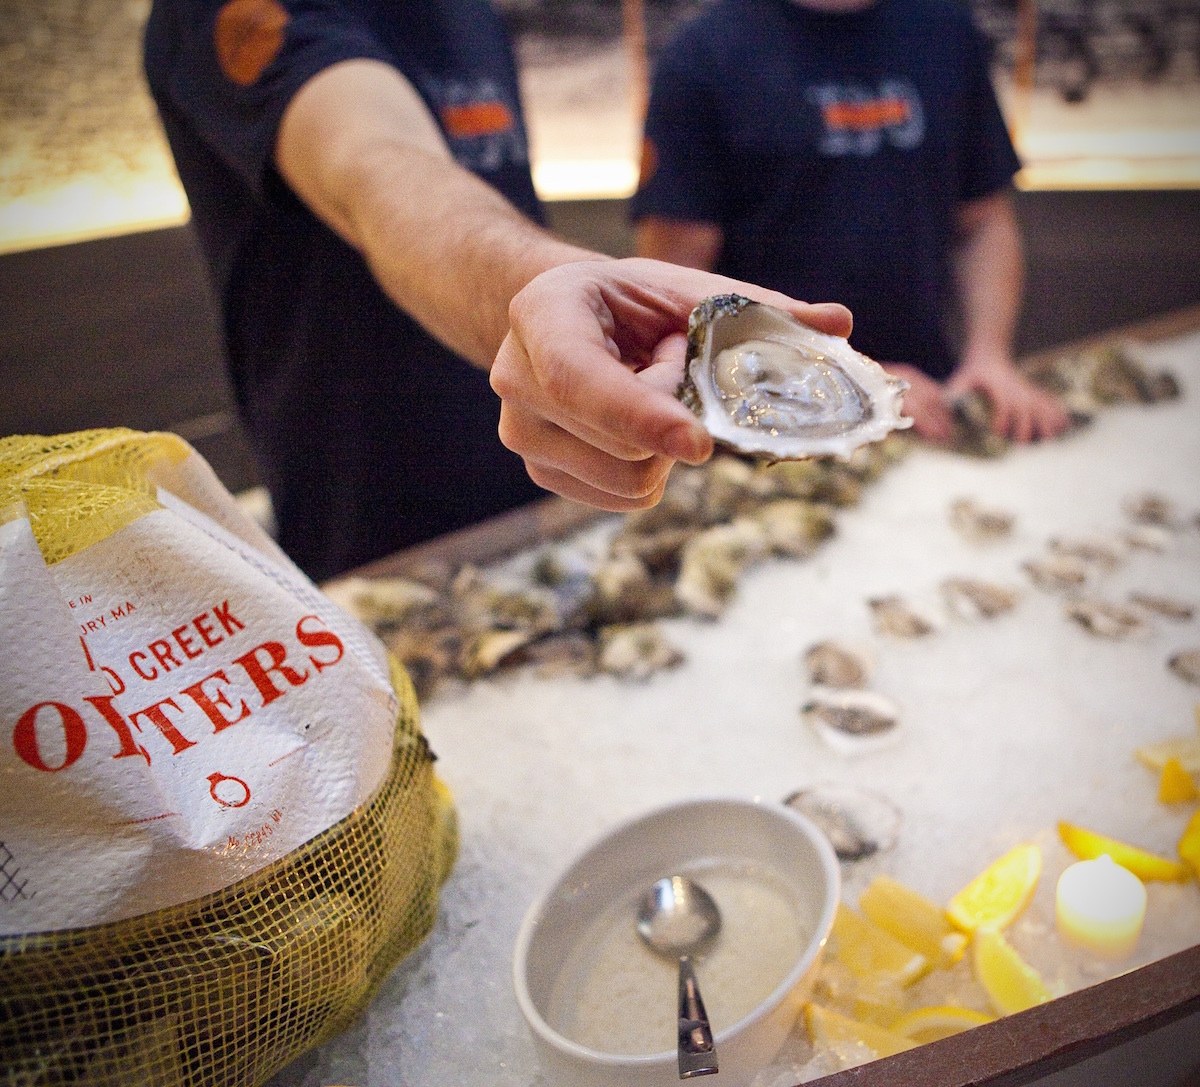 Photograph courtesy of Island Creek Oyster